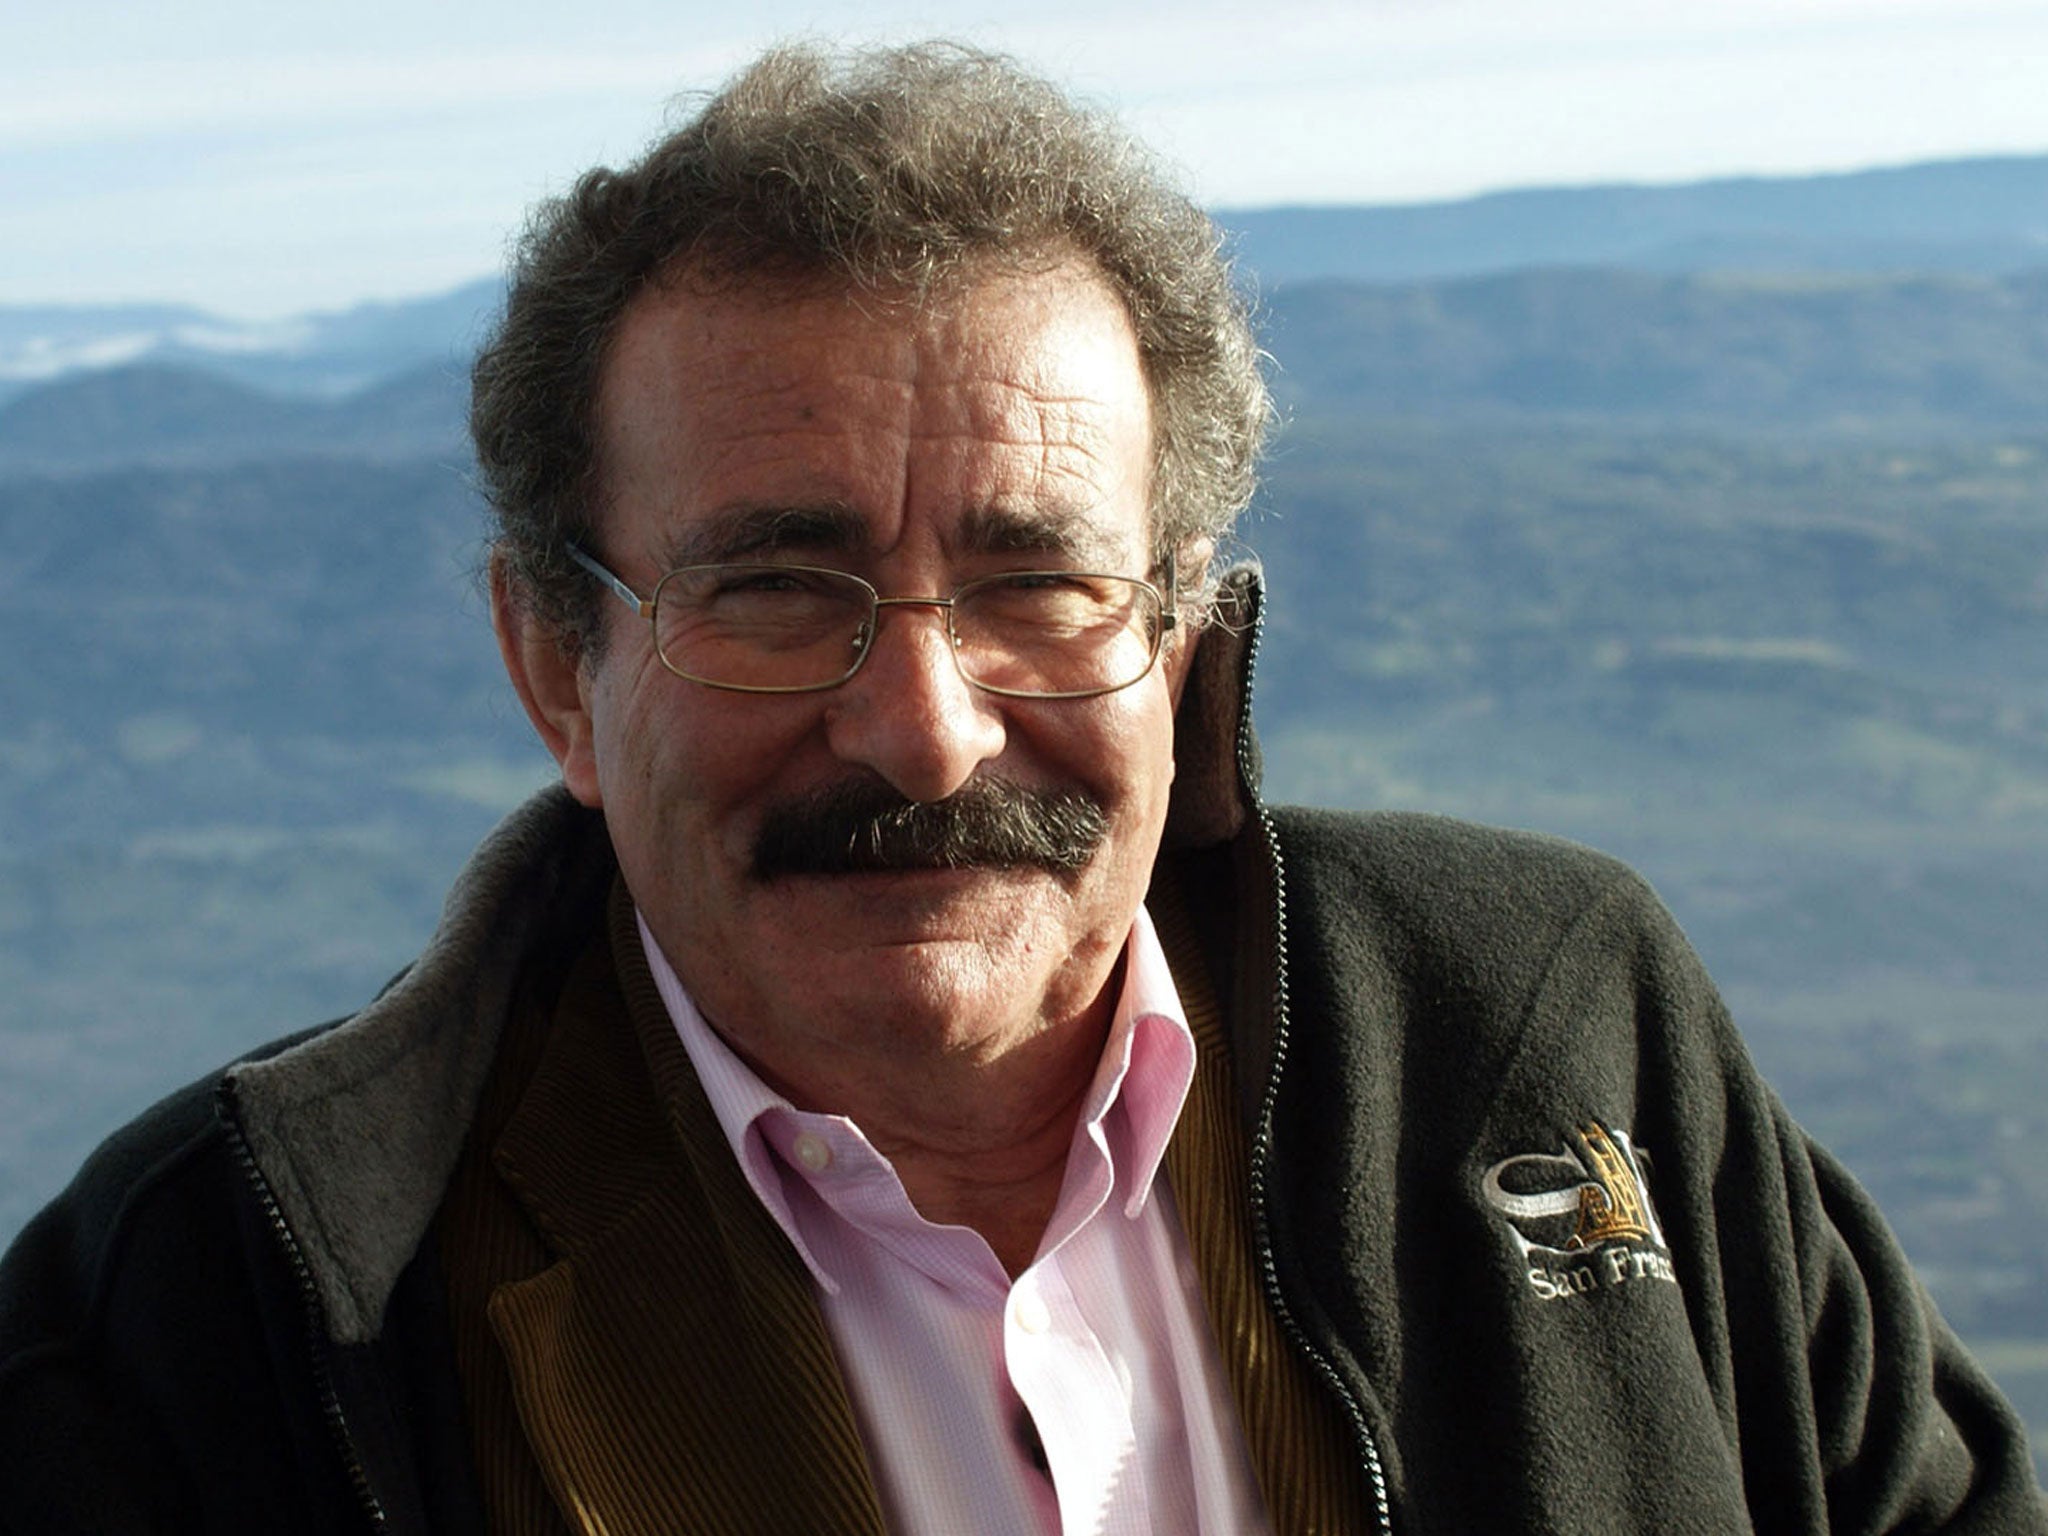 Professor Robert Winston has said that parents could start demanding designer babies as a result of improvements to IVF technology